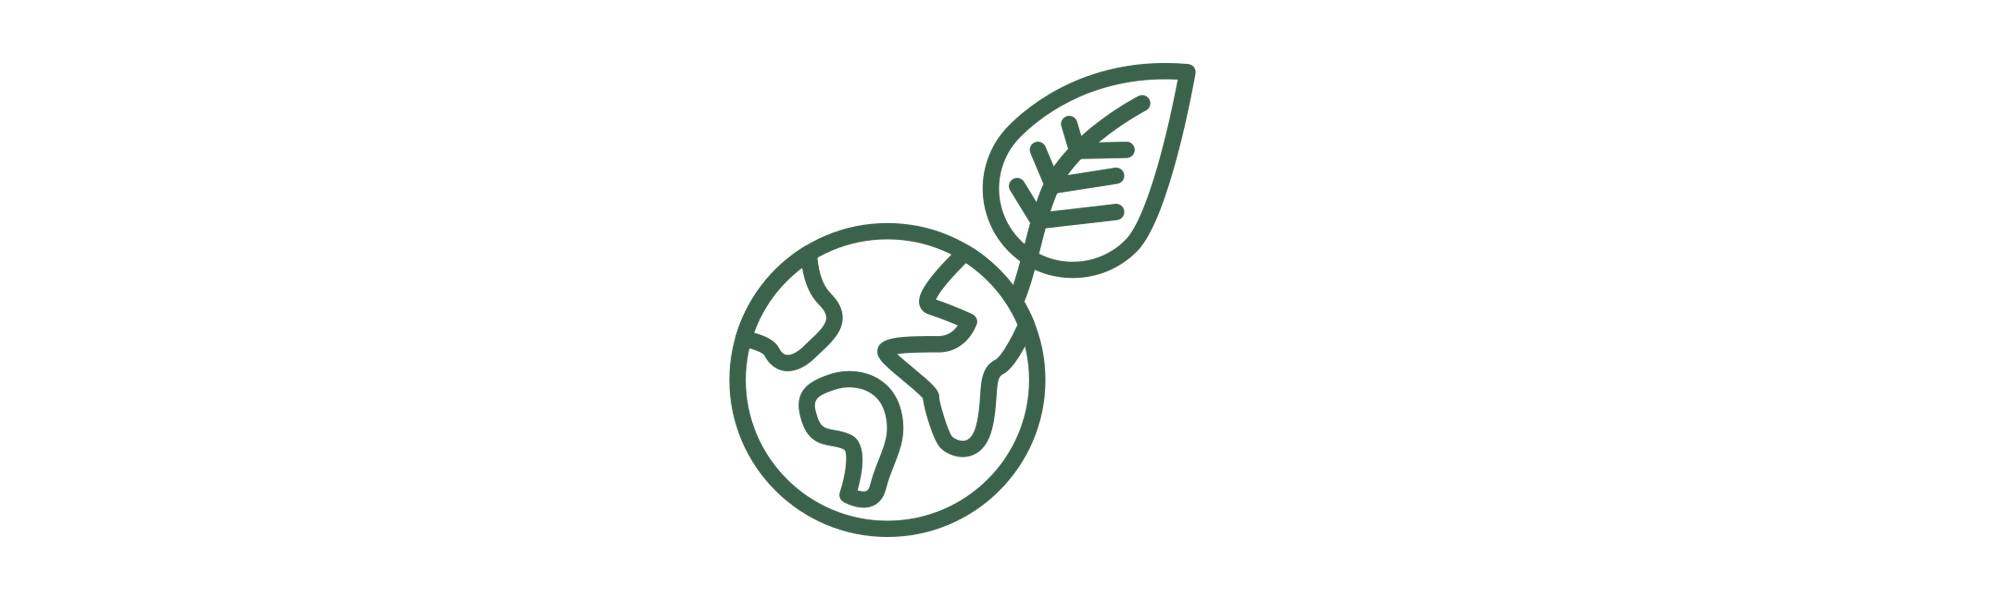 A green drawing of the earth with a leaf growing out of it.